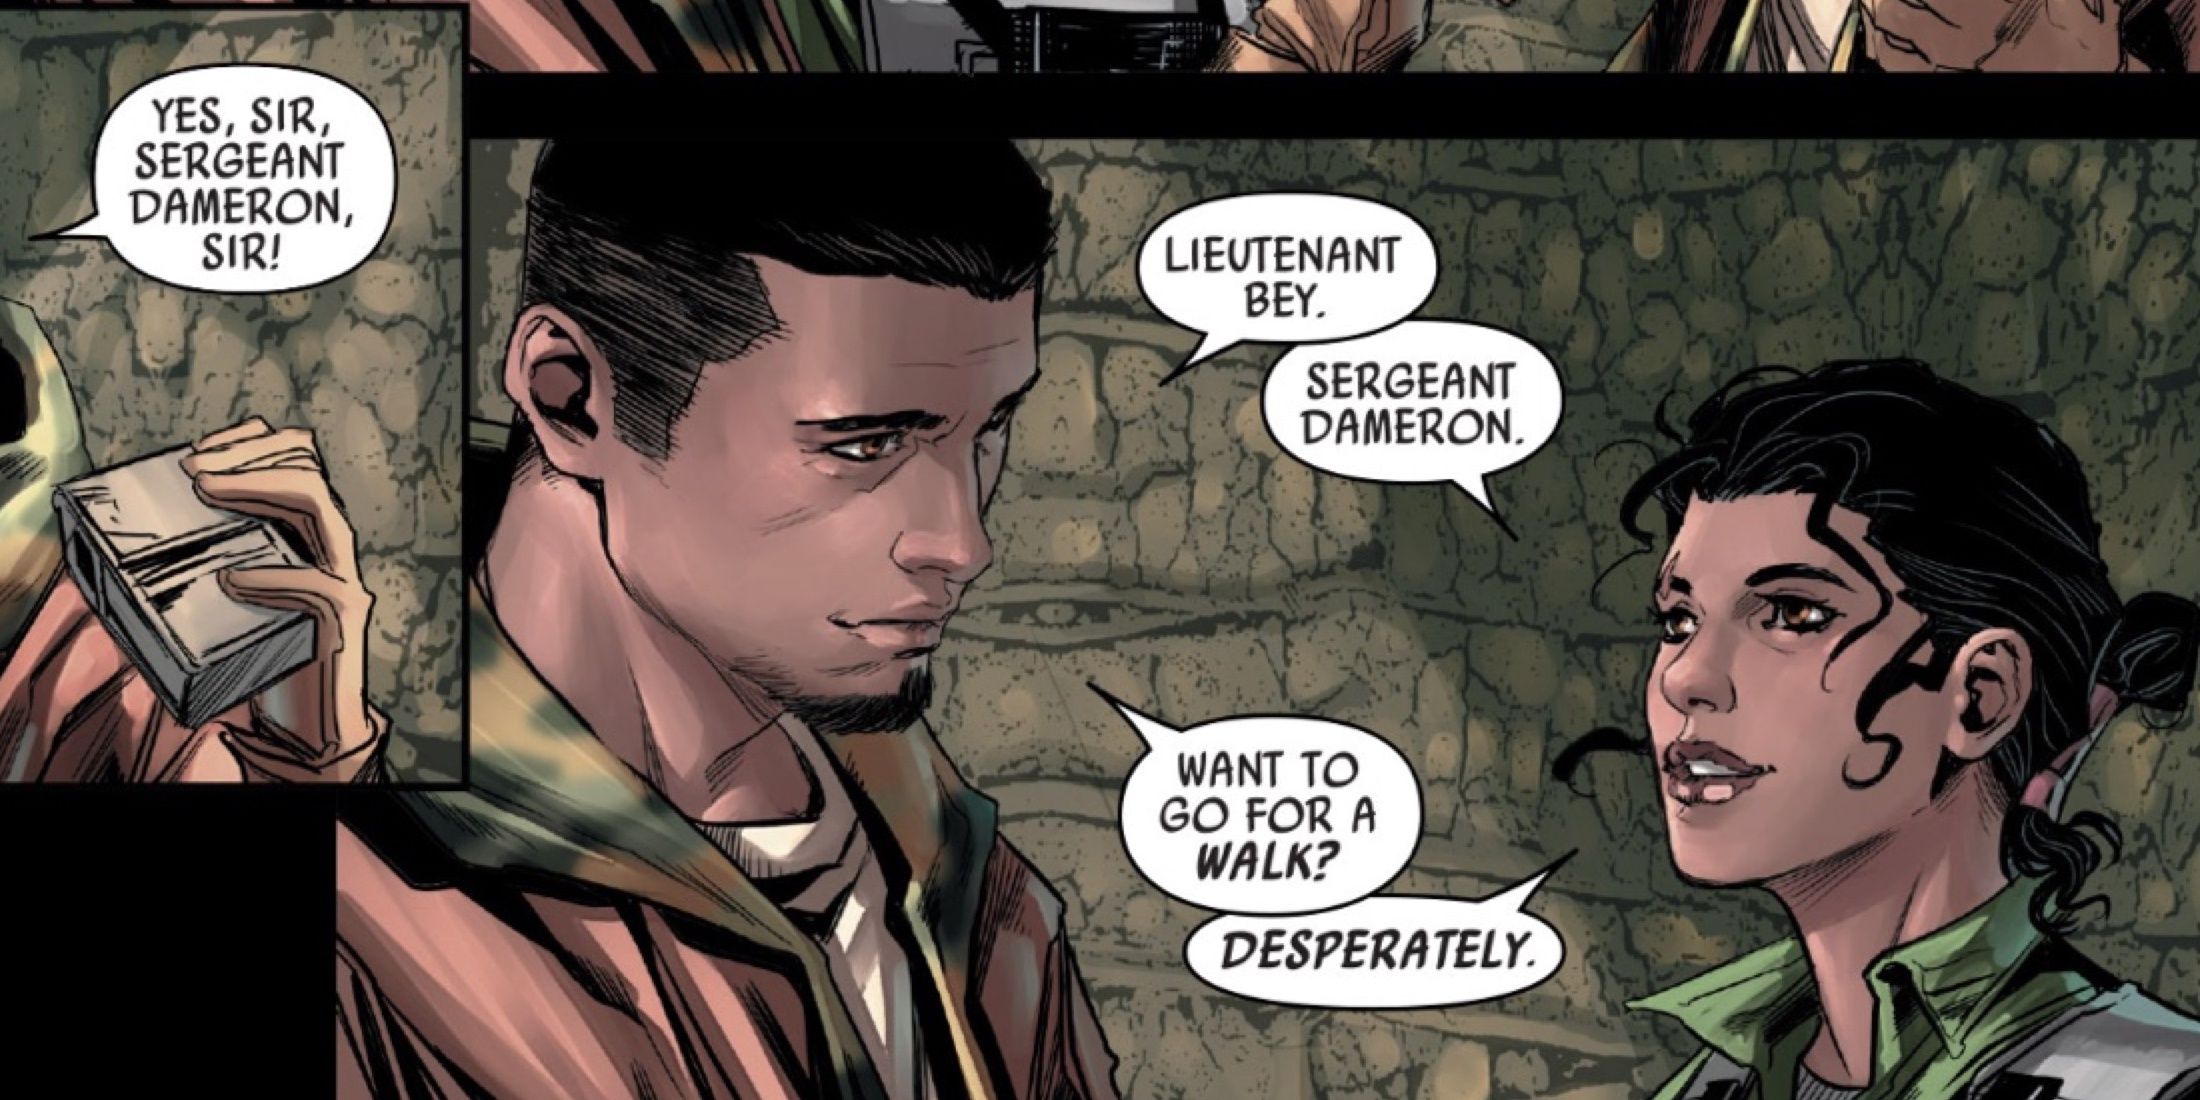 Shara Bey talking to Kes Dameron in a panel from Star Wars Shattered Empire 